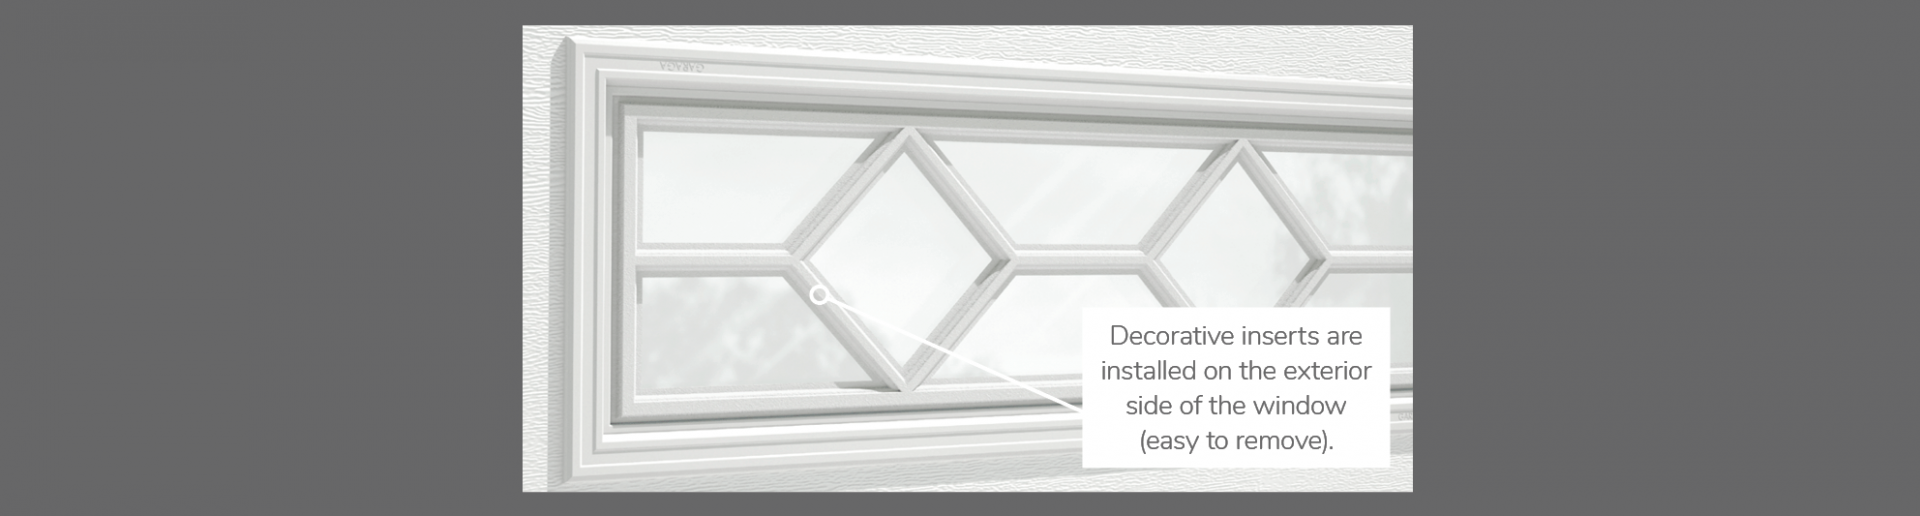 Waterton Decorative Insert, 40" x 13" or 41" x 16", available for door R-16, 3 layers - Polystyrene, 2 layers - Polystyrene and Non-insulated